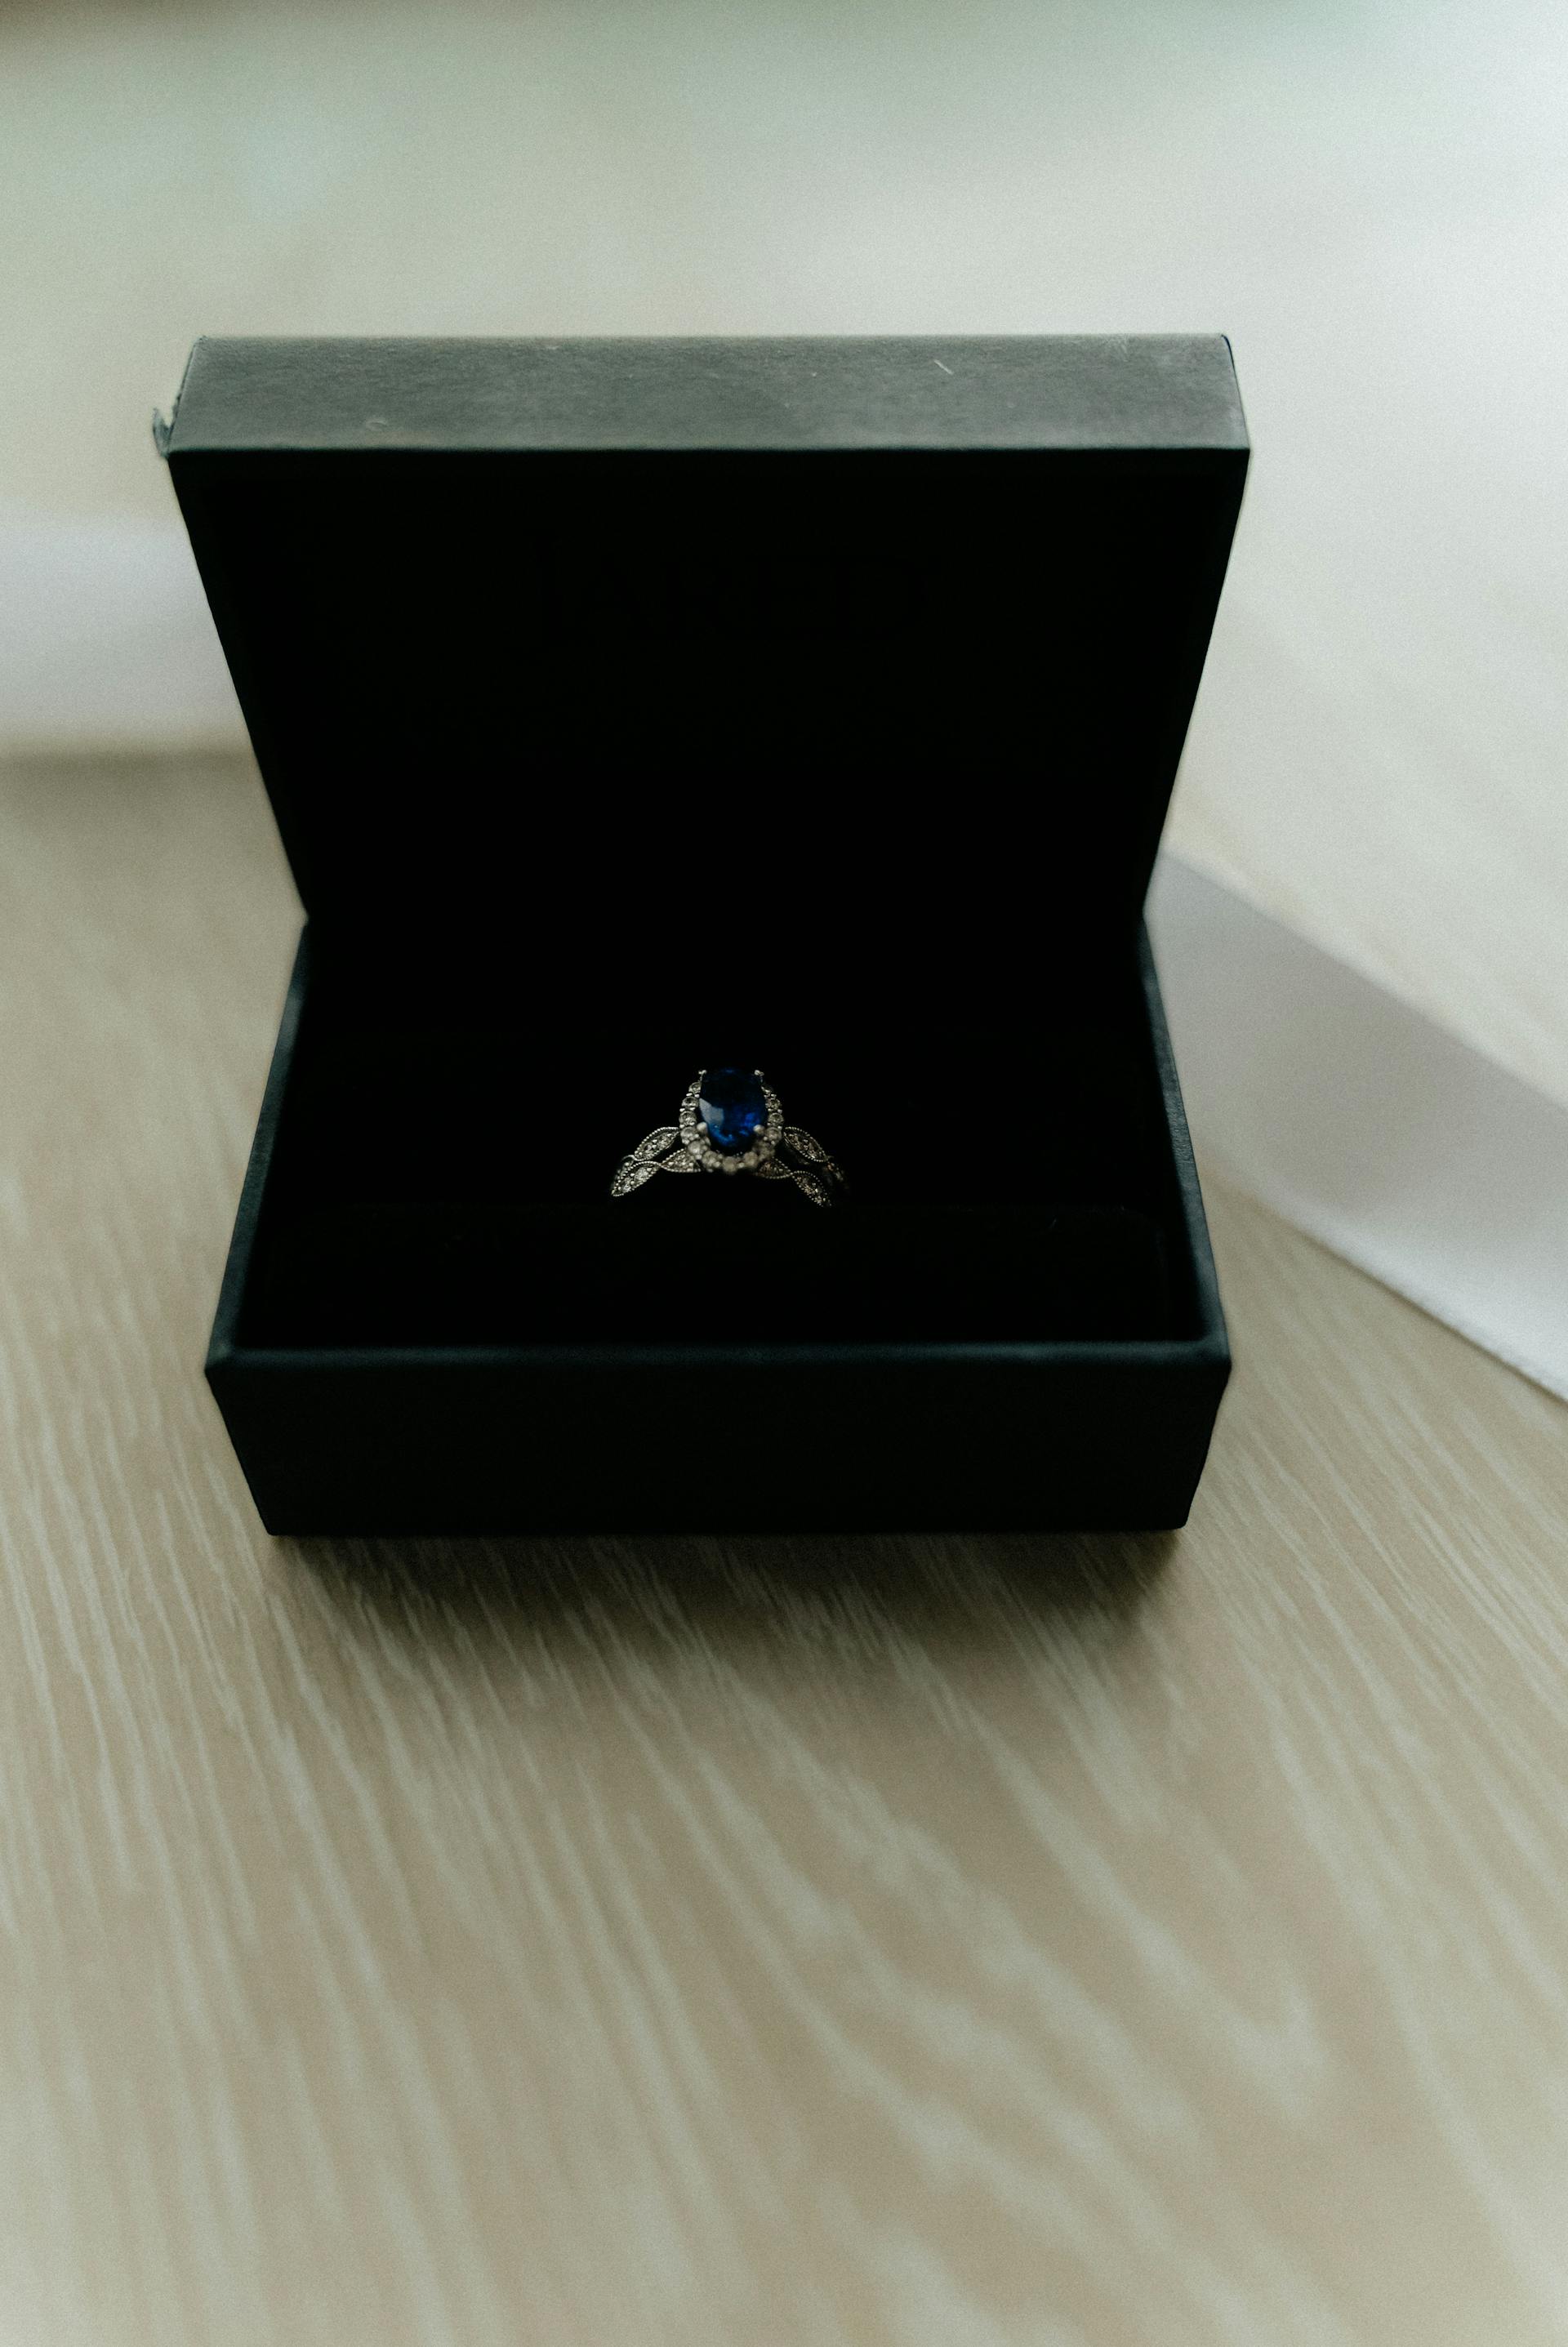 A ring box on a table | Source: Pexels